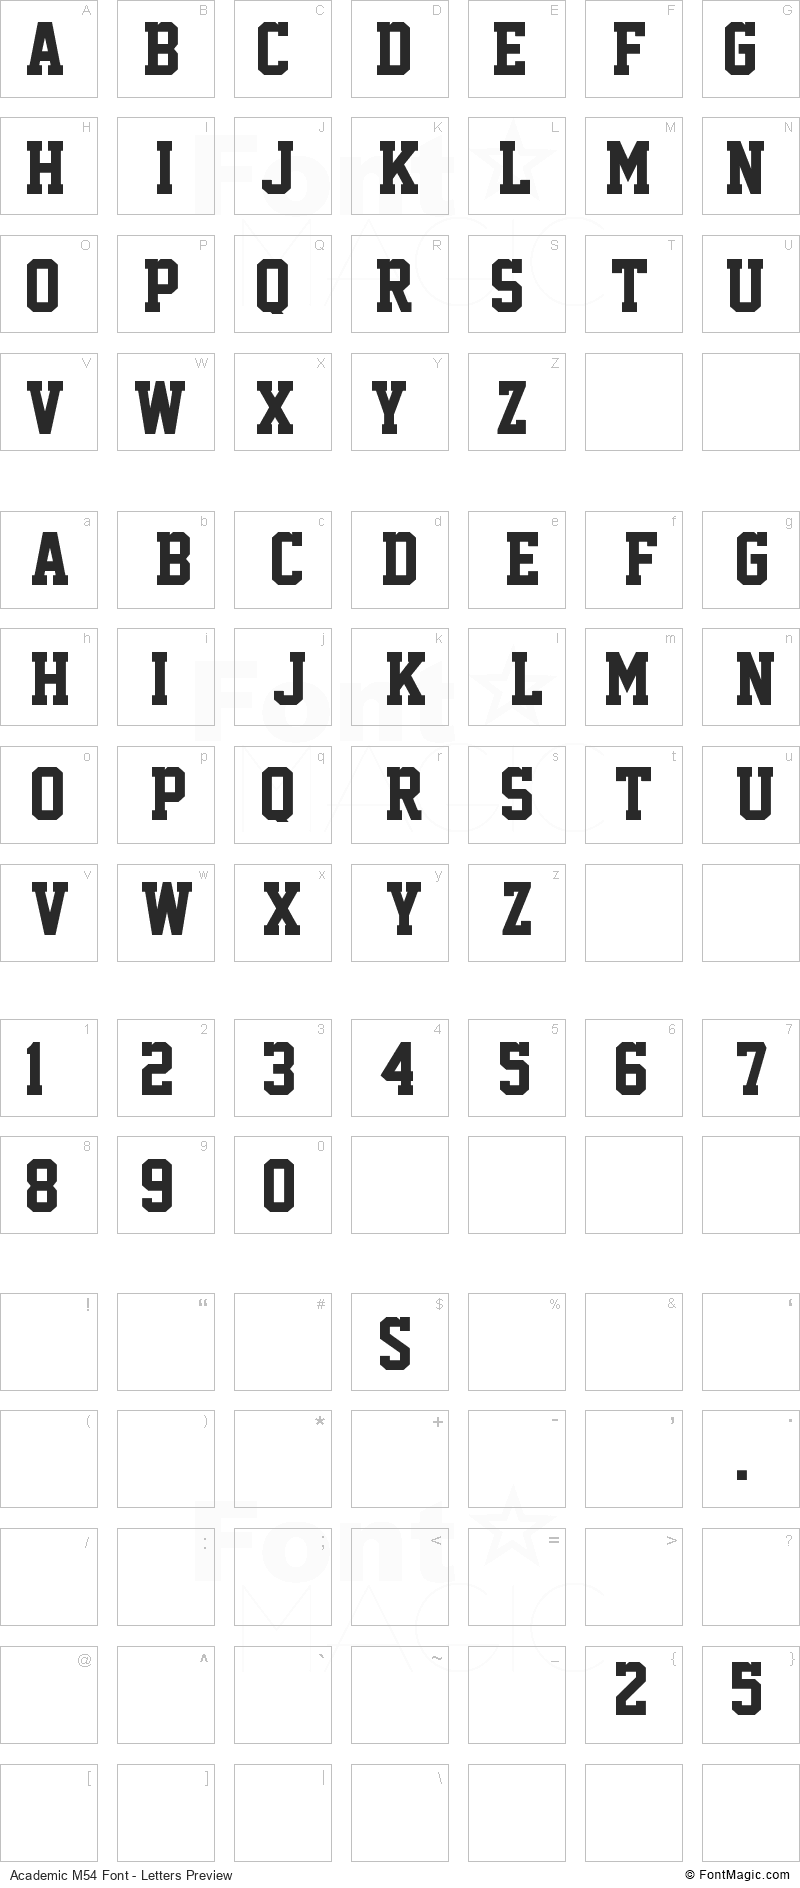 Academic M54 Font - All Latters Preview Chart